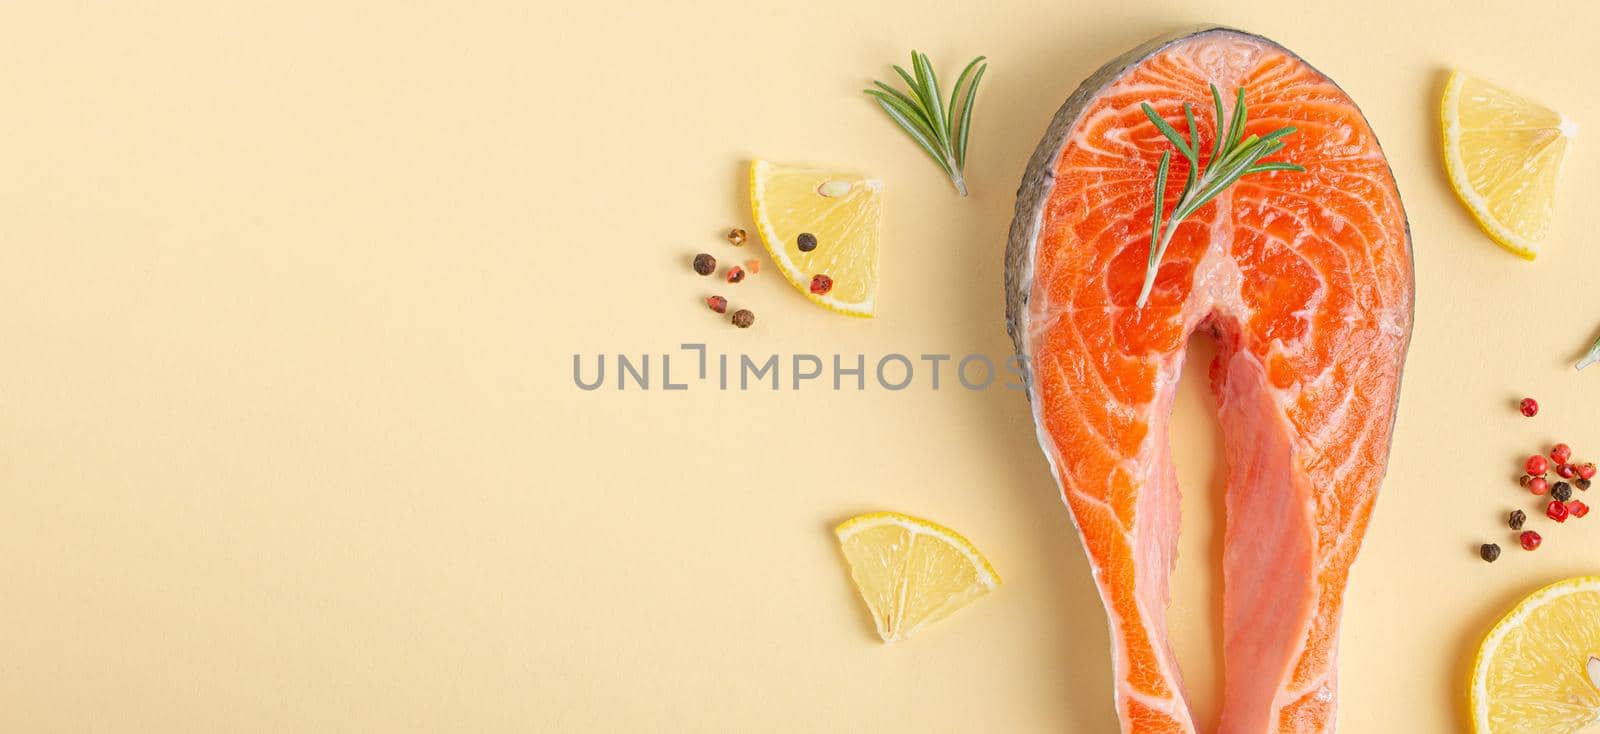 Raw fresh fish salmon steak top view on beige pastel background from above by its_al_dente